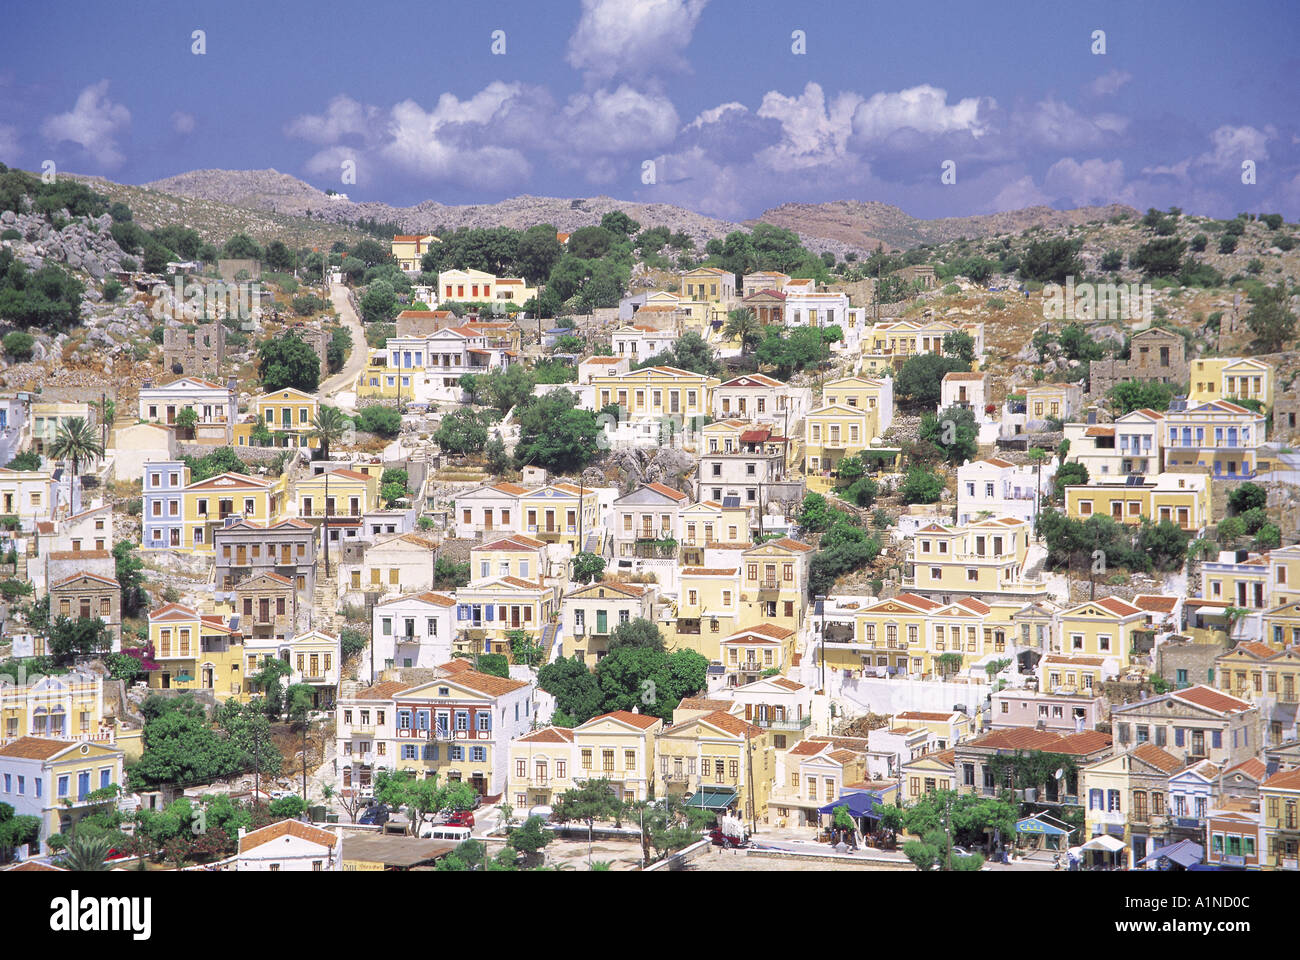 Italianate houses on the island of Symi in the Dodecanese chain, Greece Stock Photo